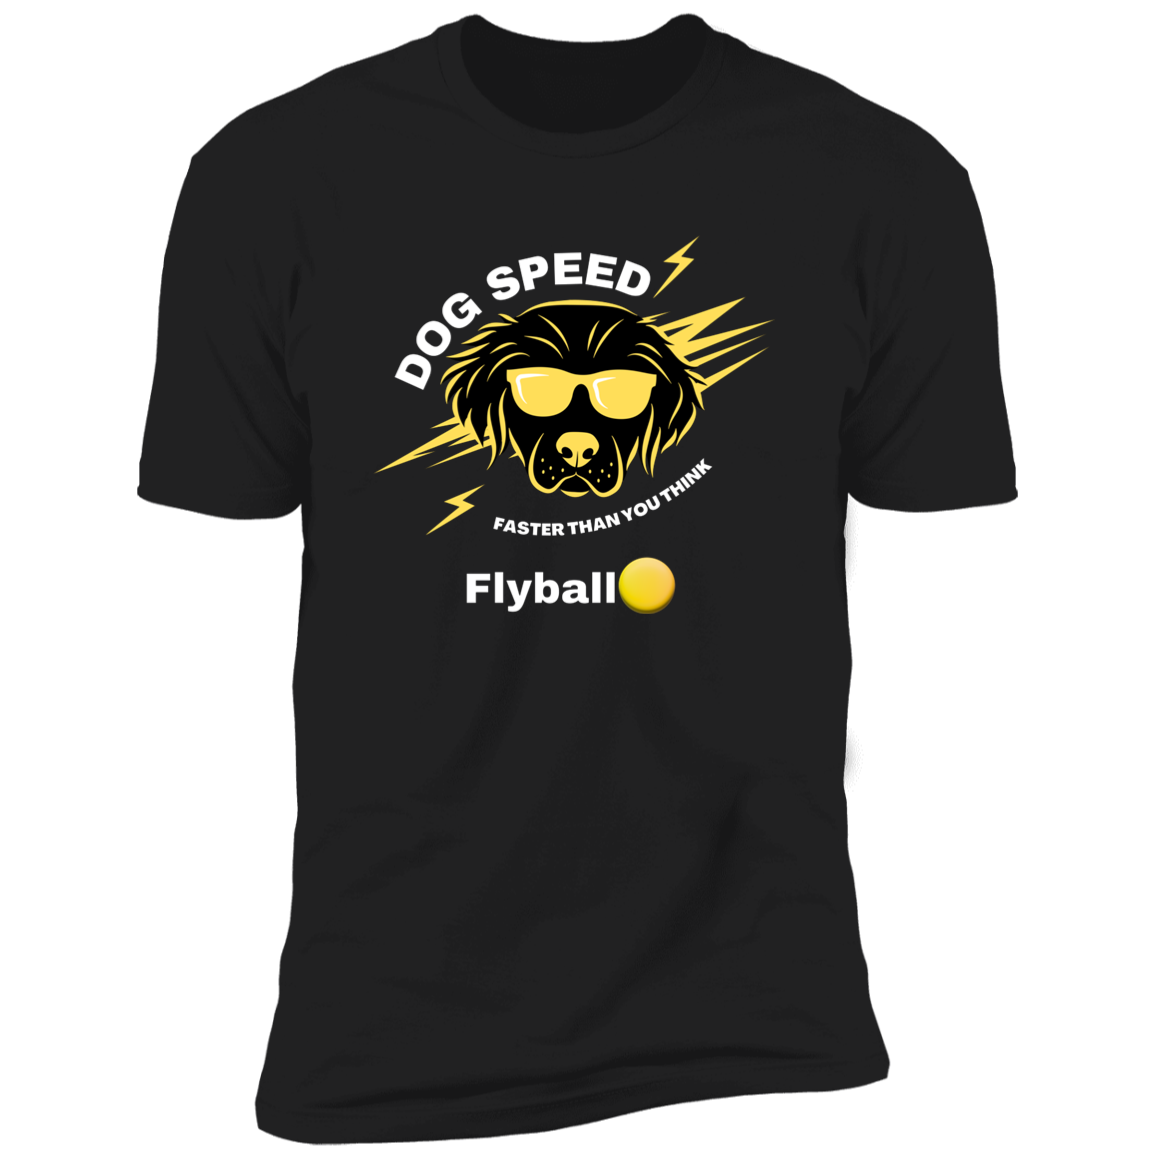 Dog Speed Faster Than You Think Flyball T-shirt, Flyball shirt dog shirt for humans, in black